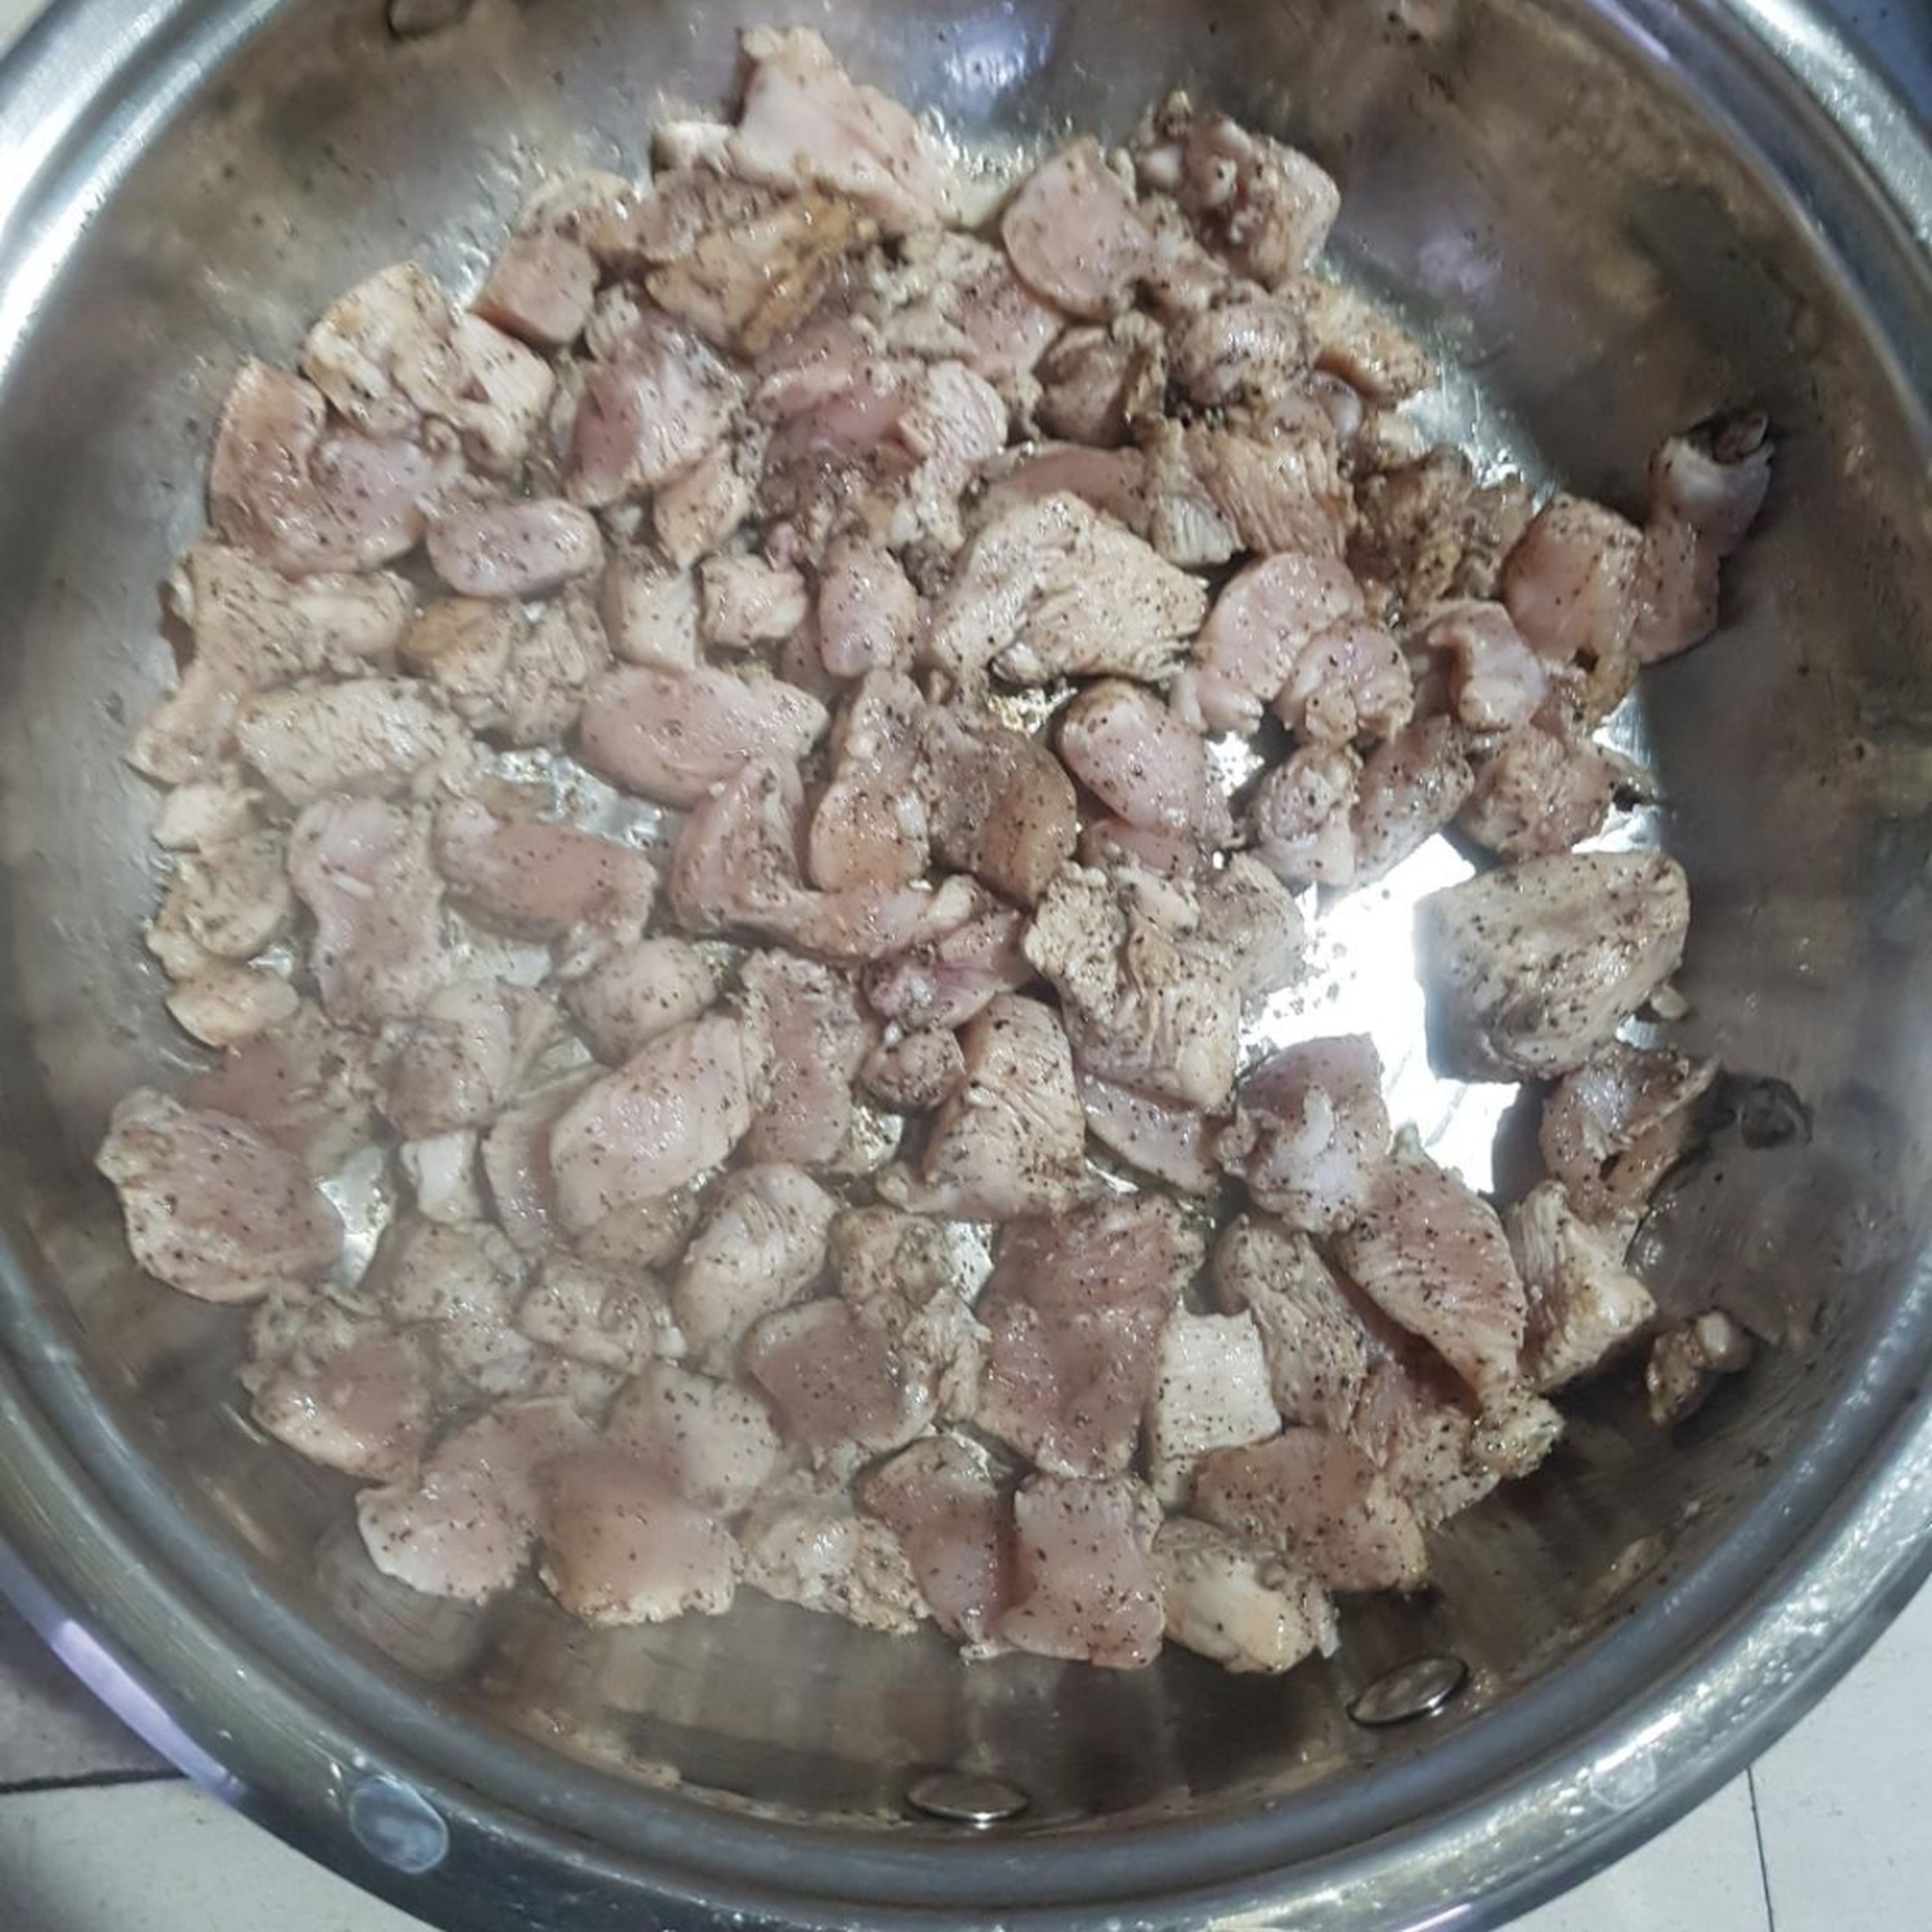 Fry the diced chicken breast using a pan